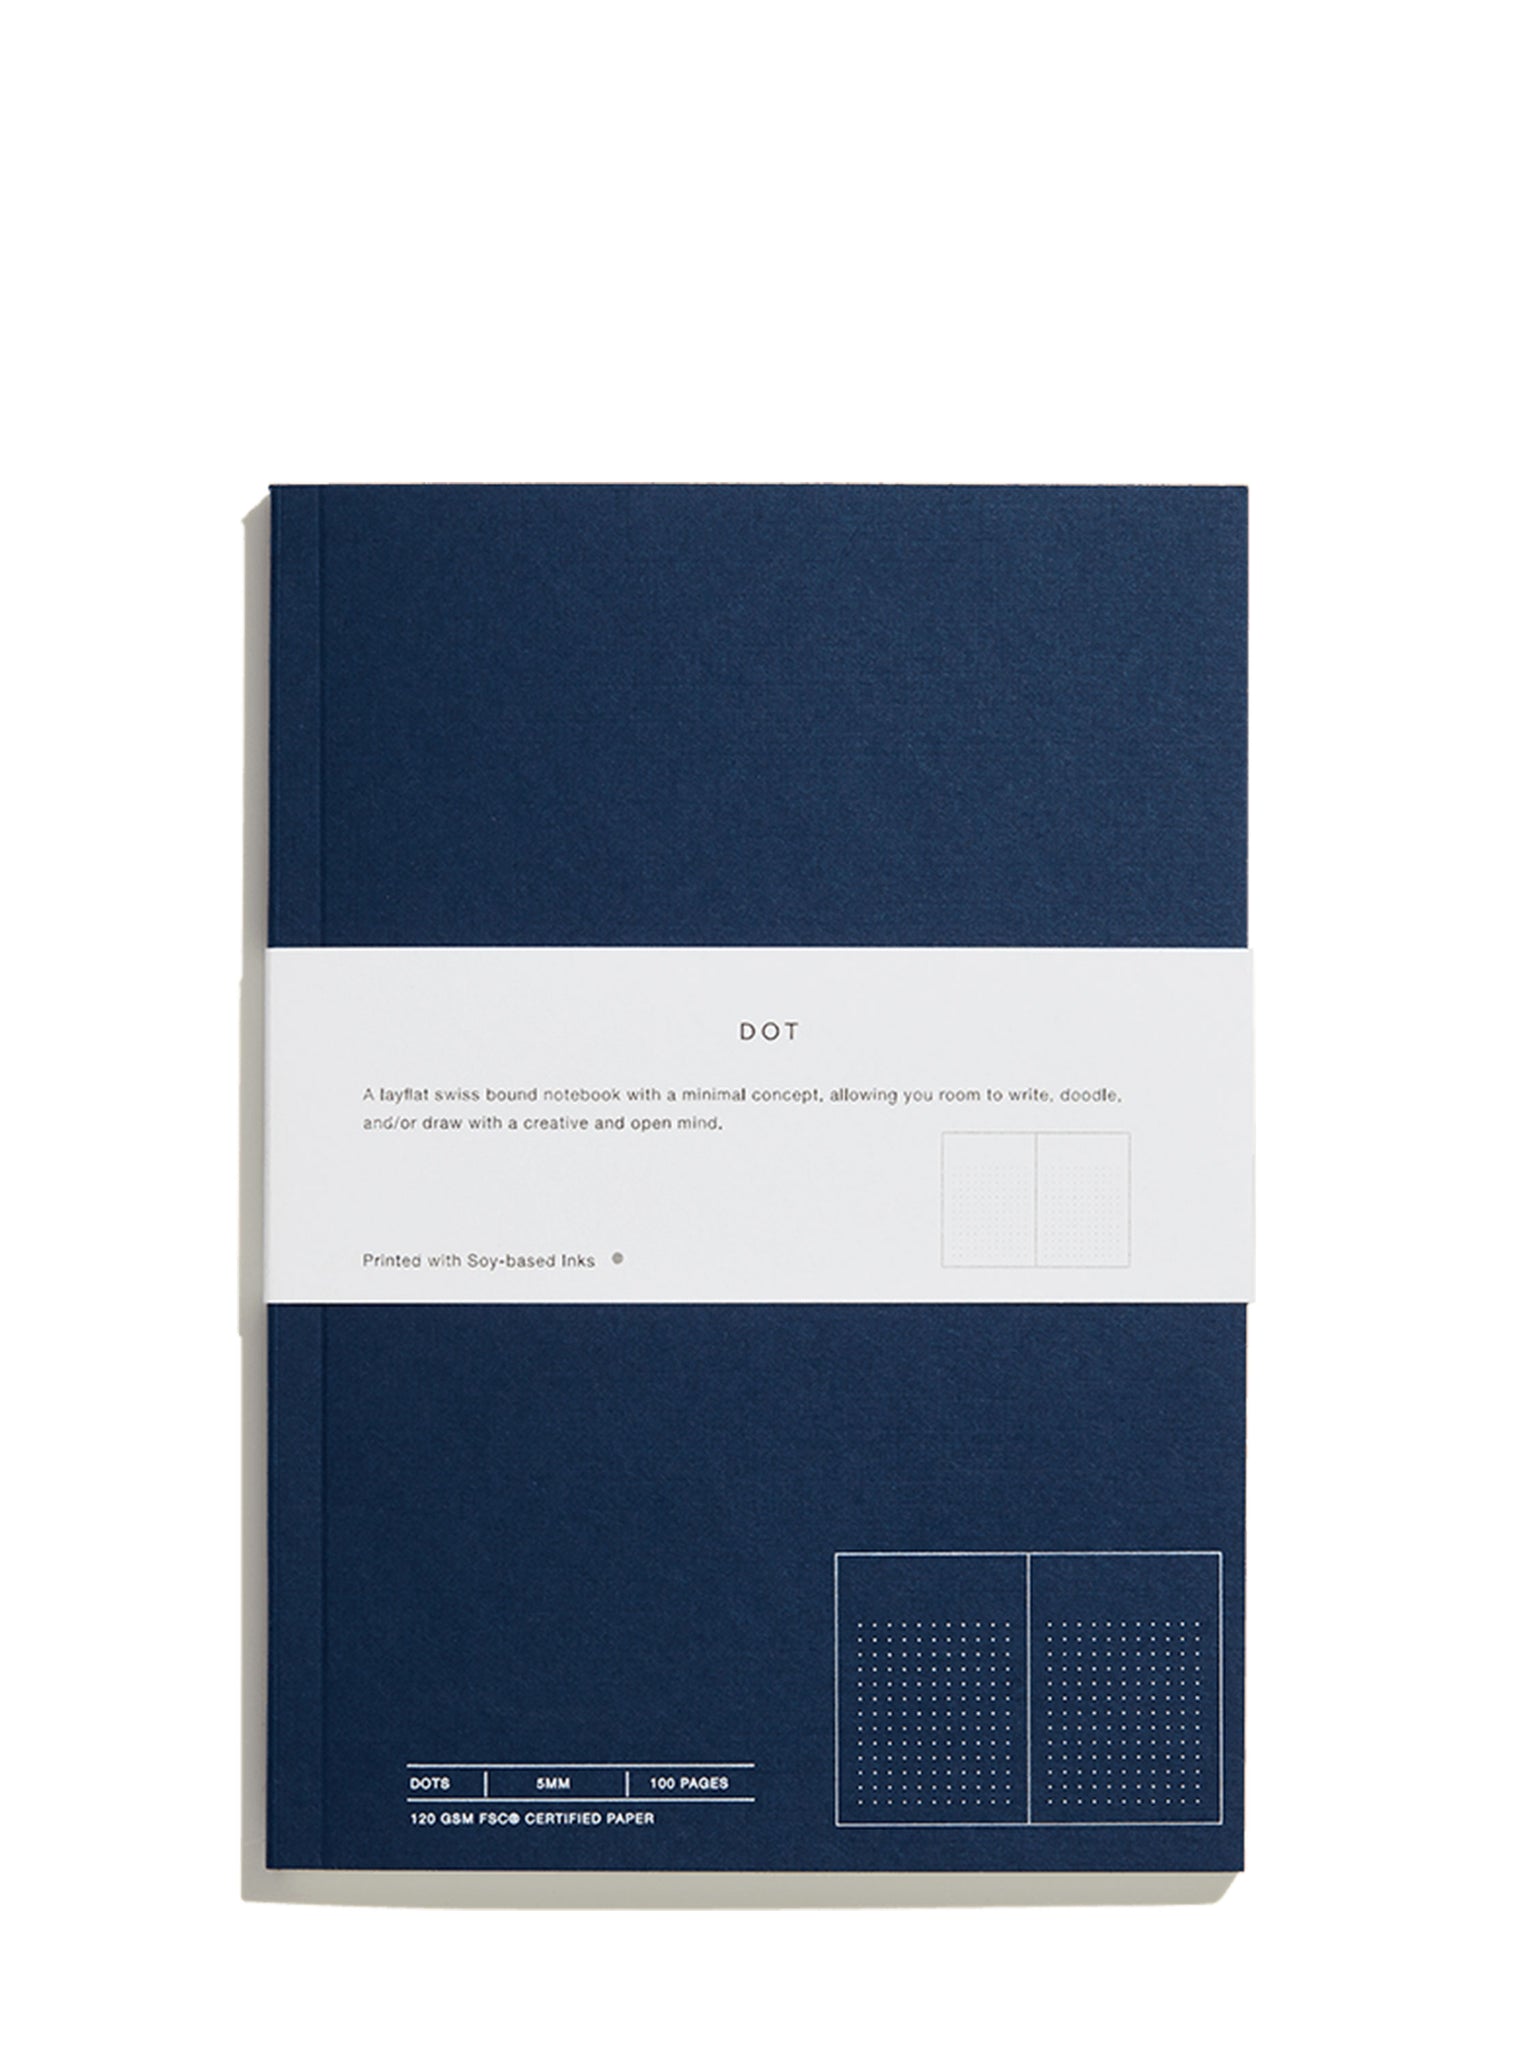 Before Breakfast blue dot notebook opened handmade in london available at yod and co